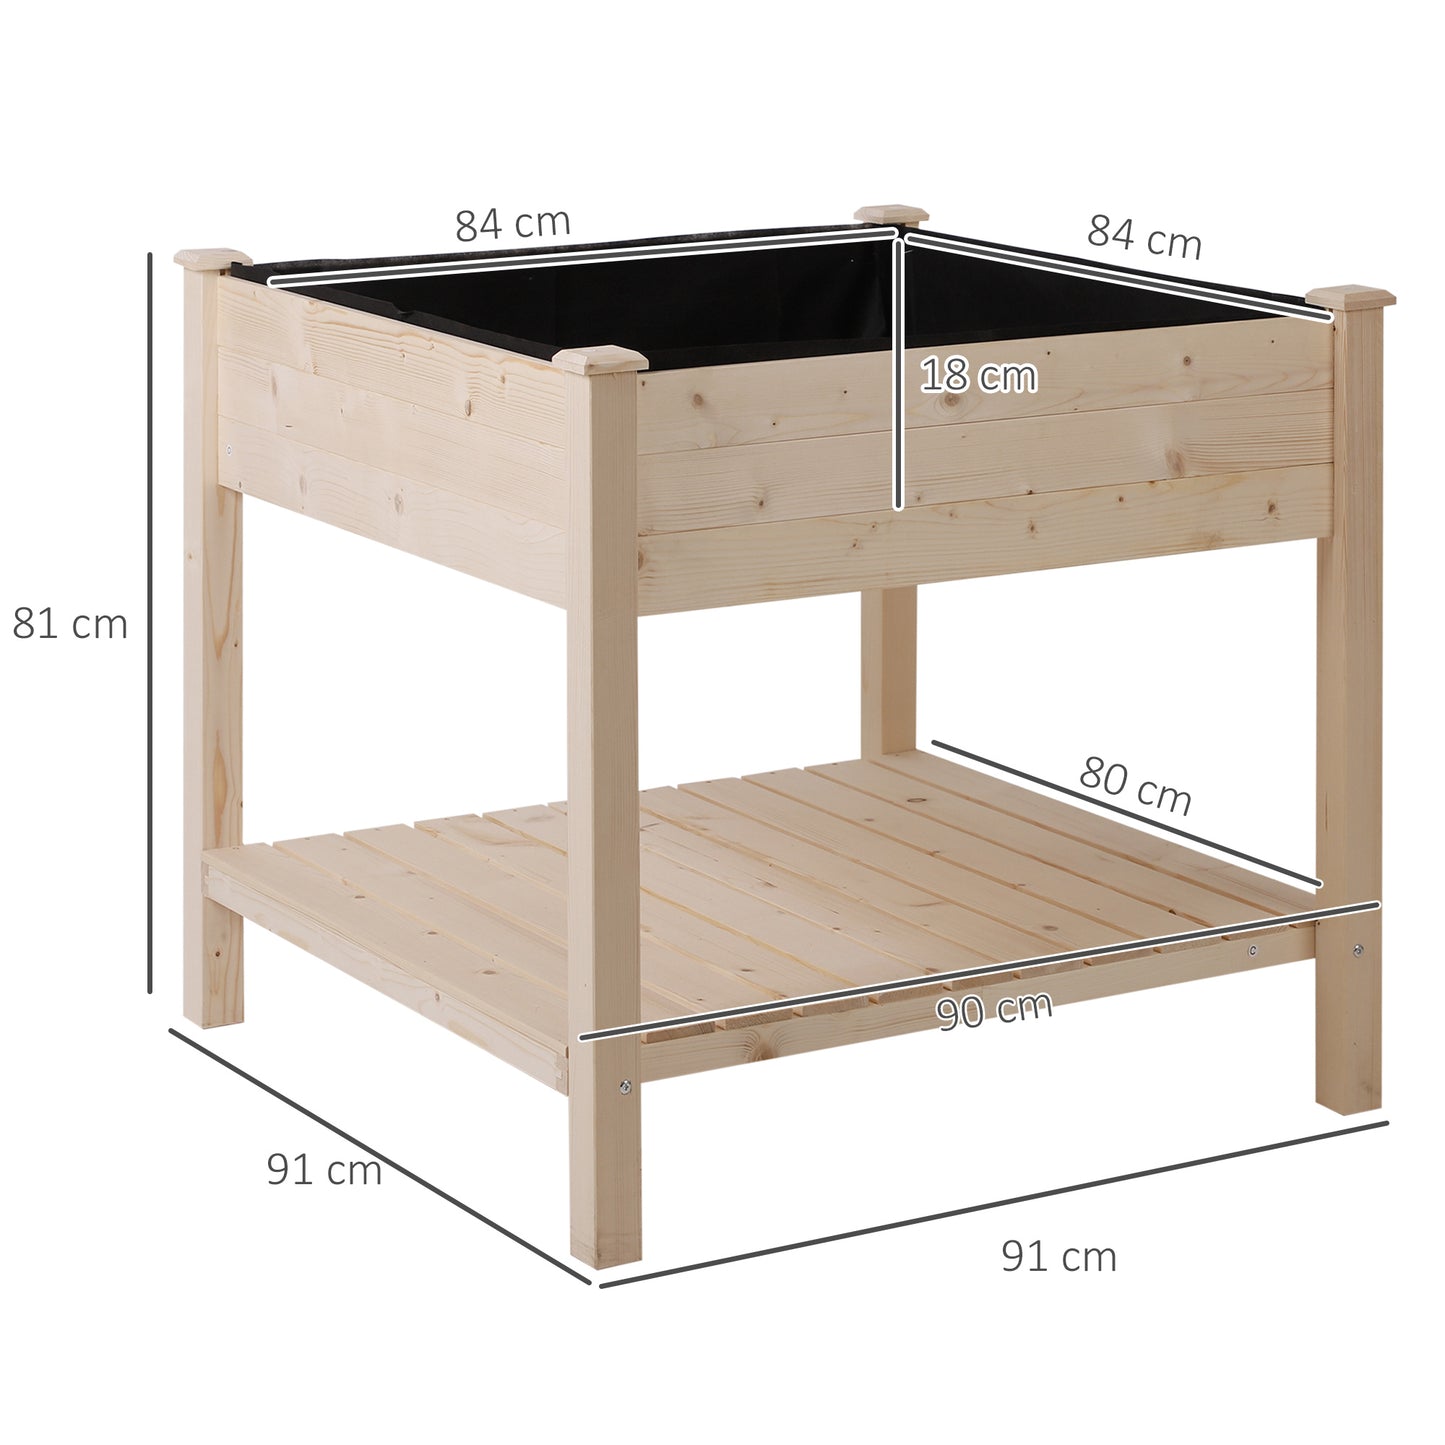 Outsunny Wooden Planter Elevated Garden Planting Bed Stand Outdoor Flower Box w/ Storage Shelf